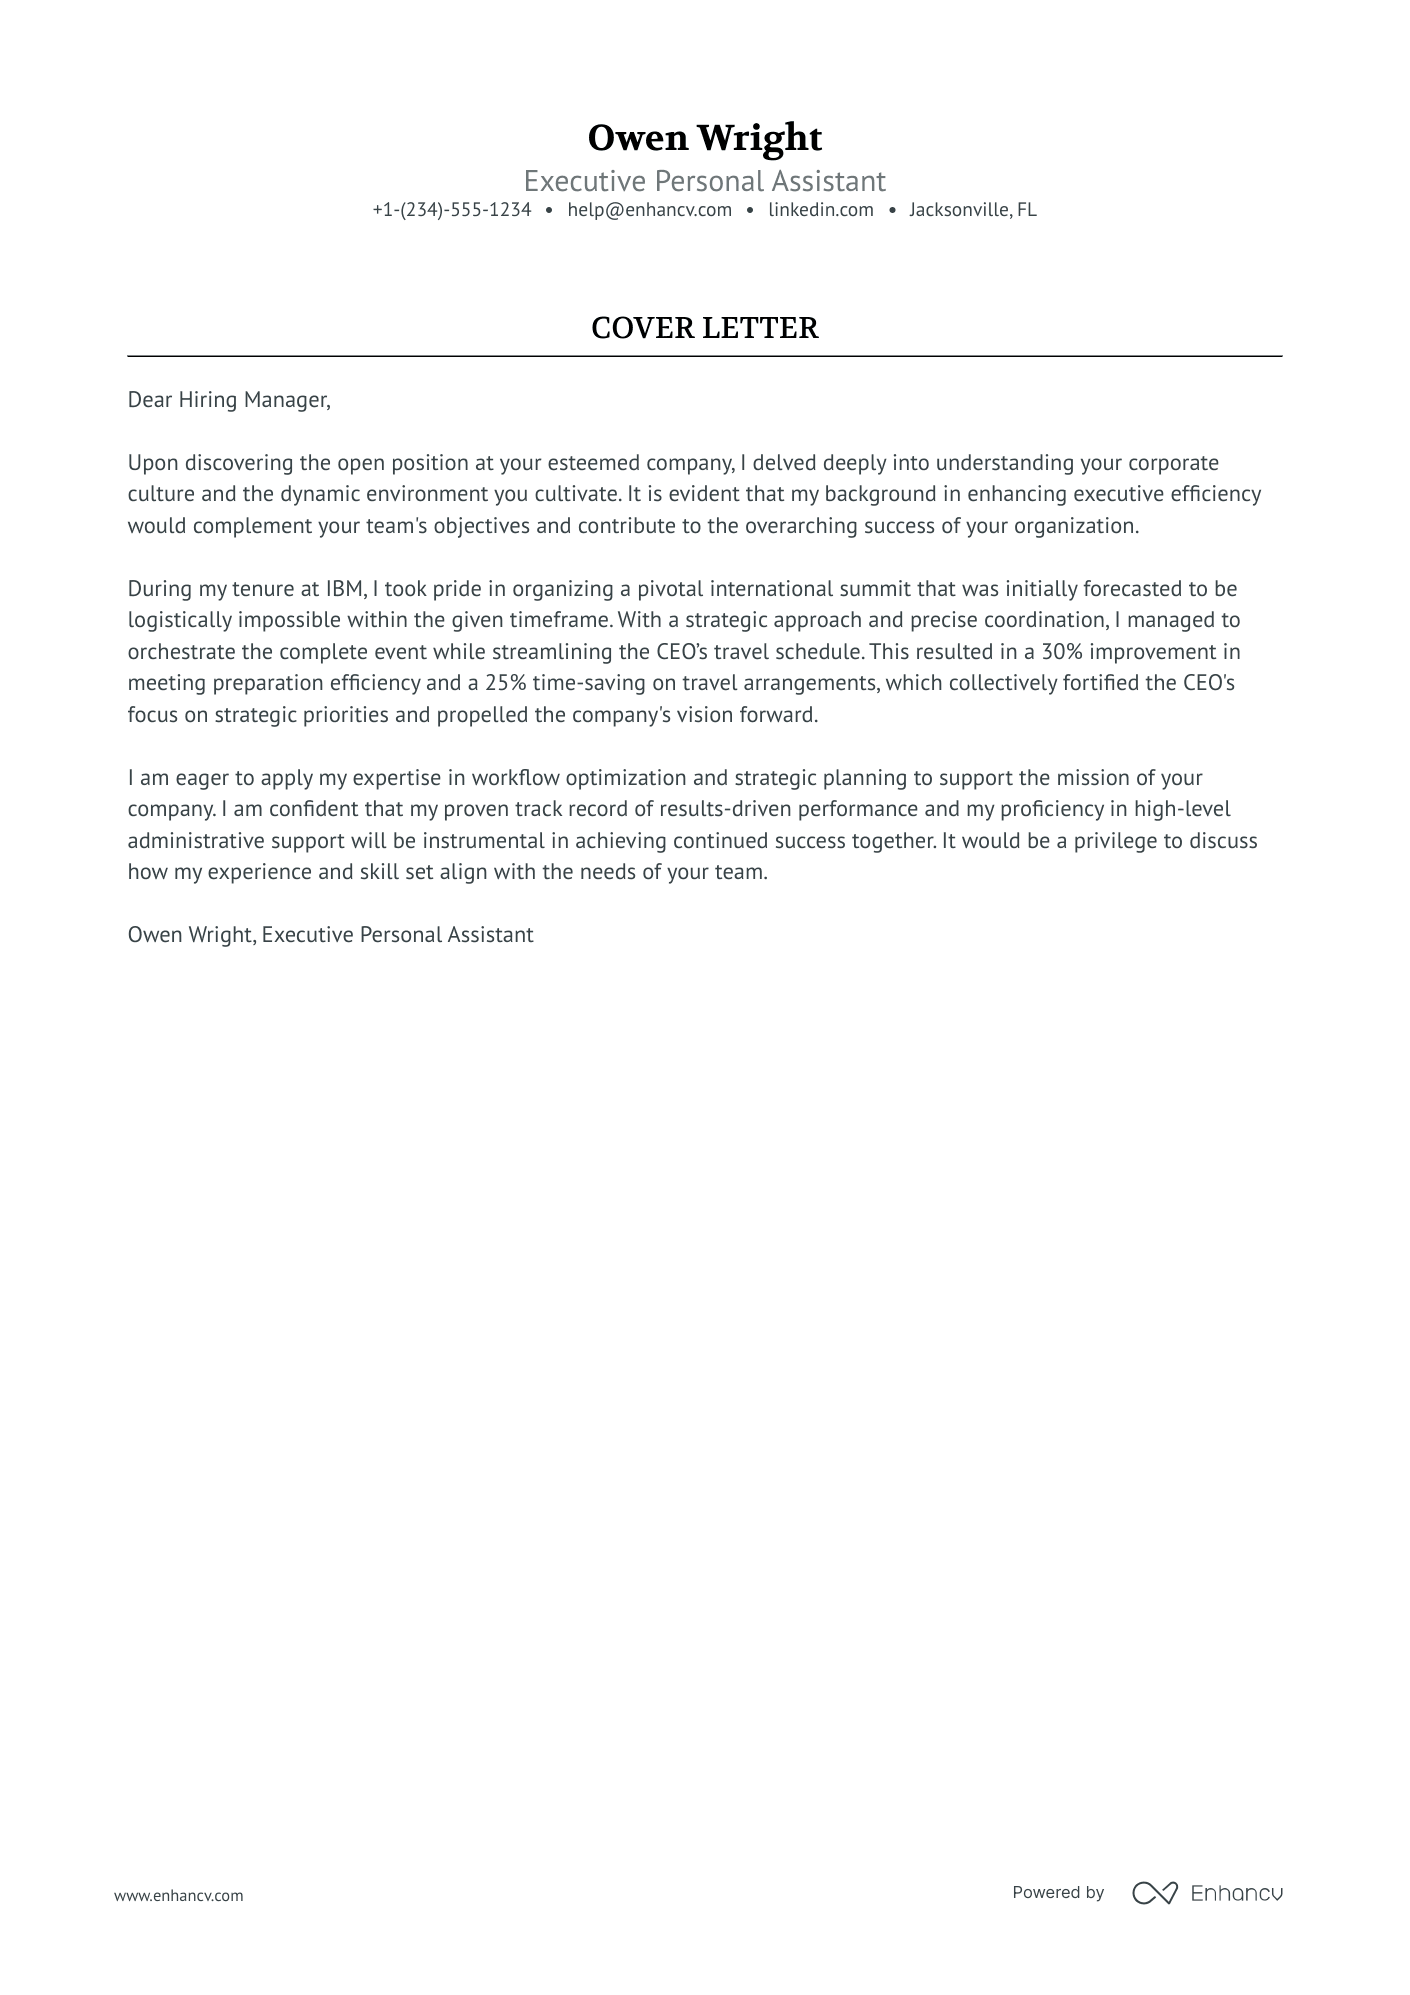 cover letter template for personal assistant